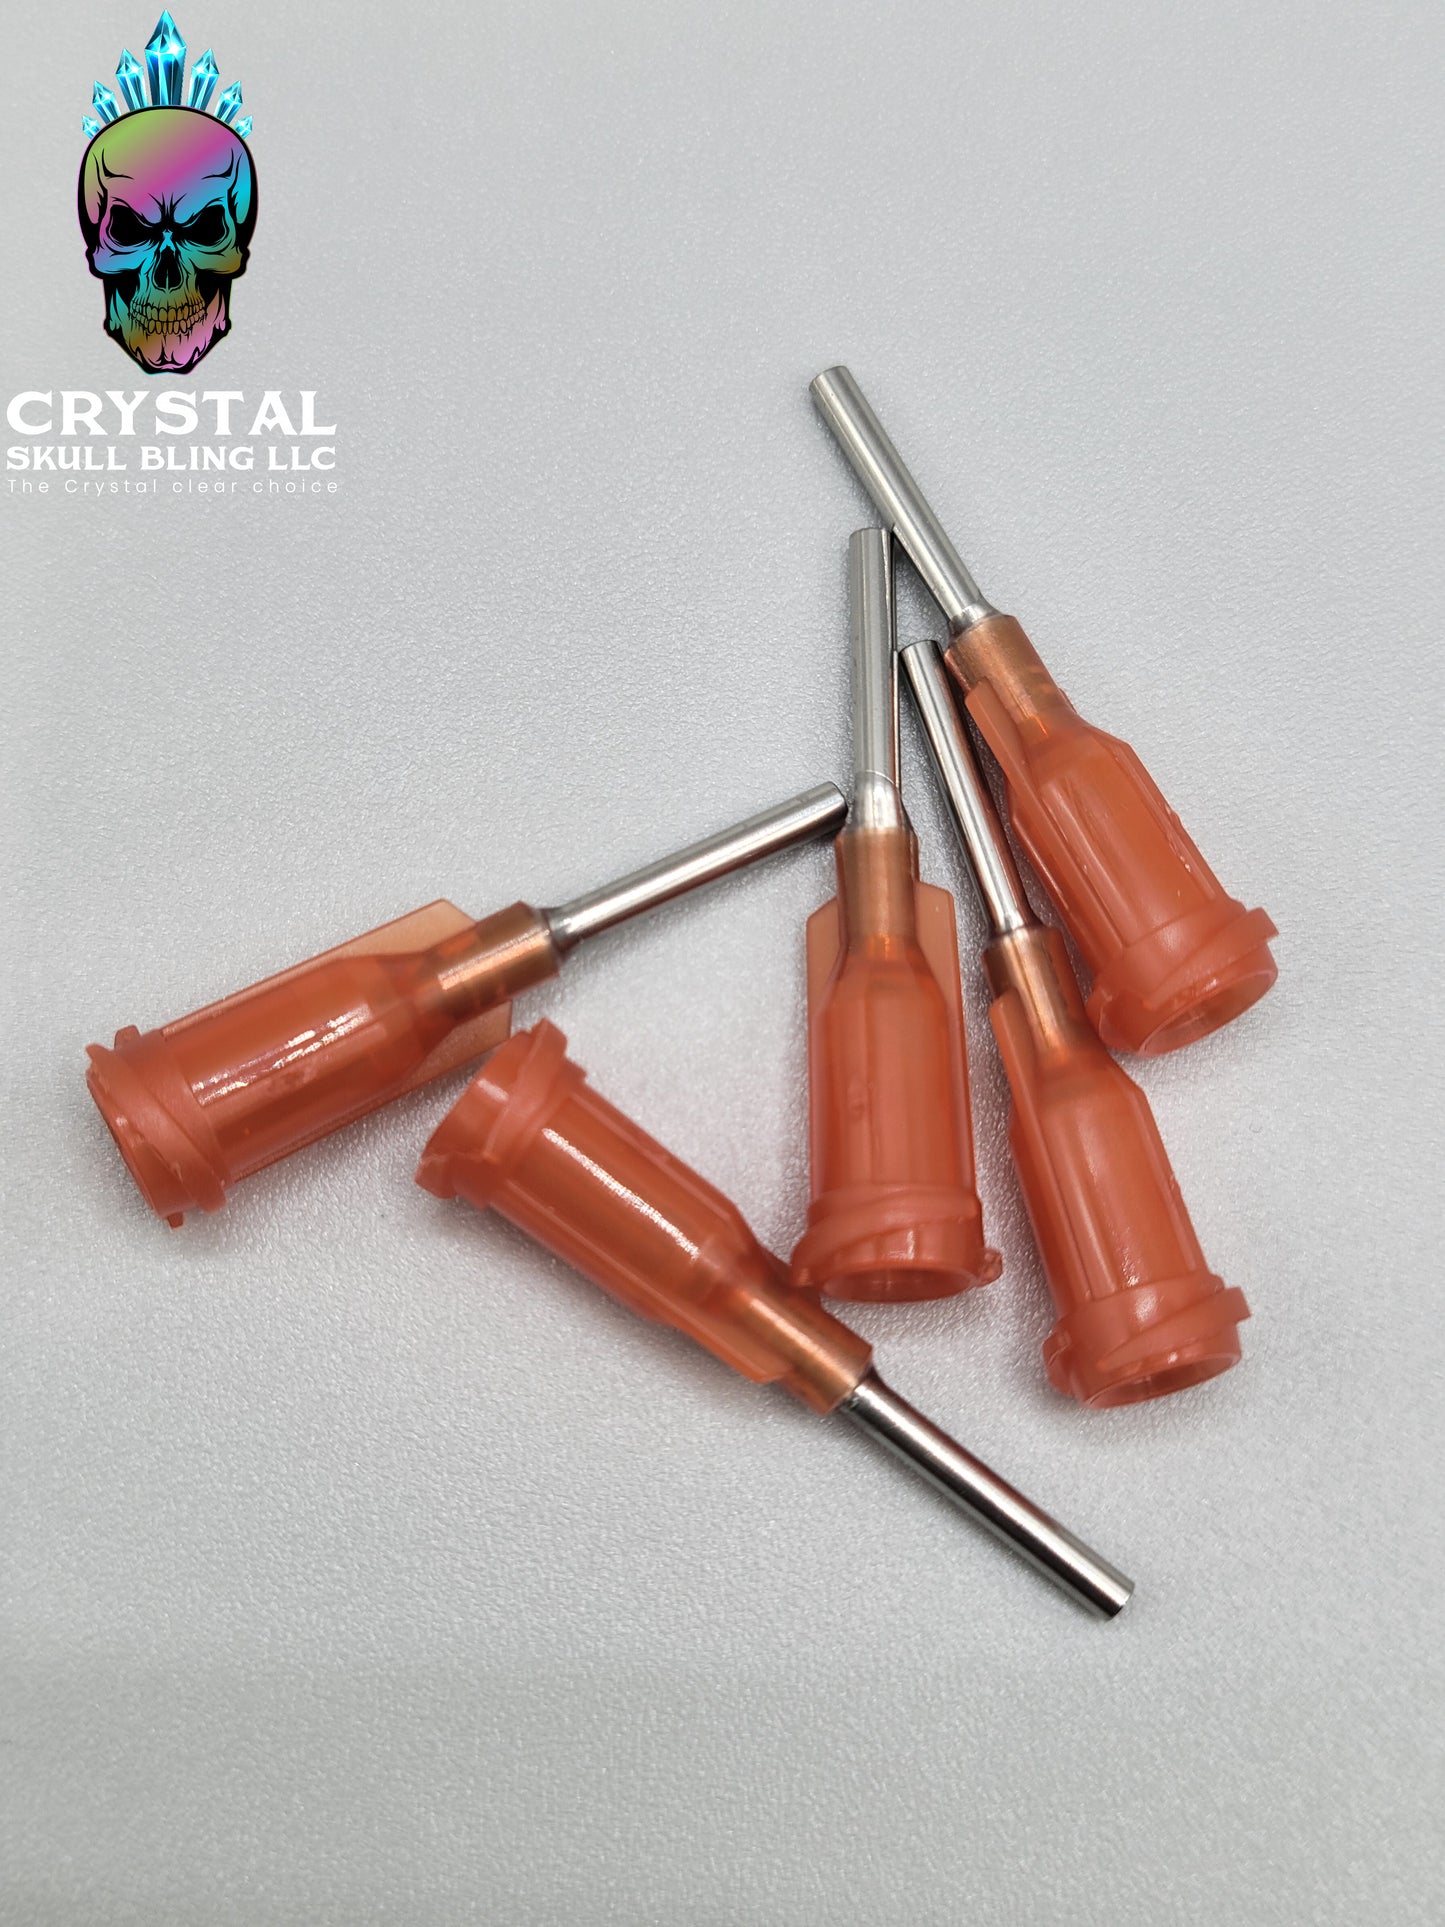 15 G Bottle Needle Replacements